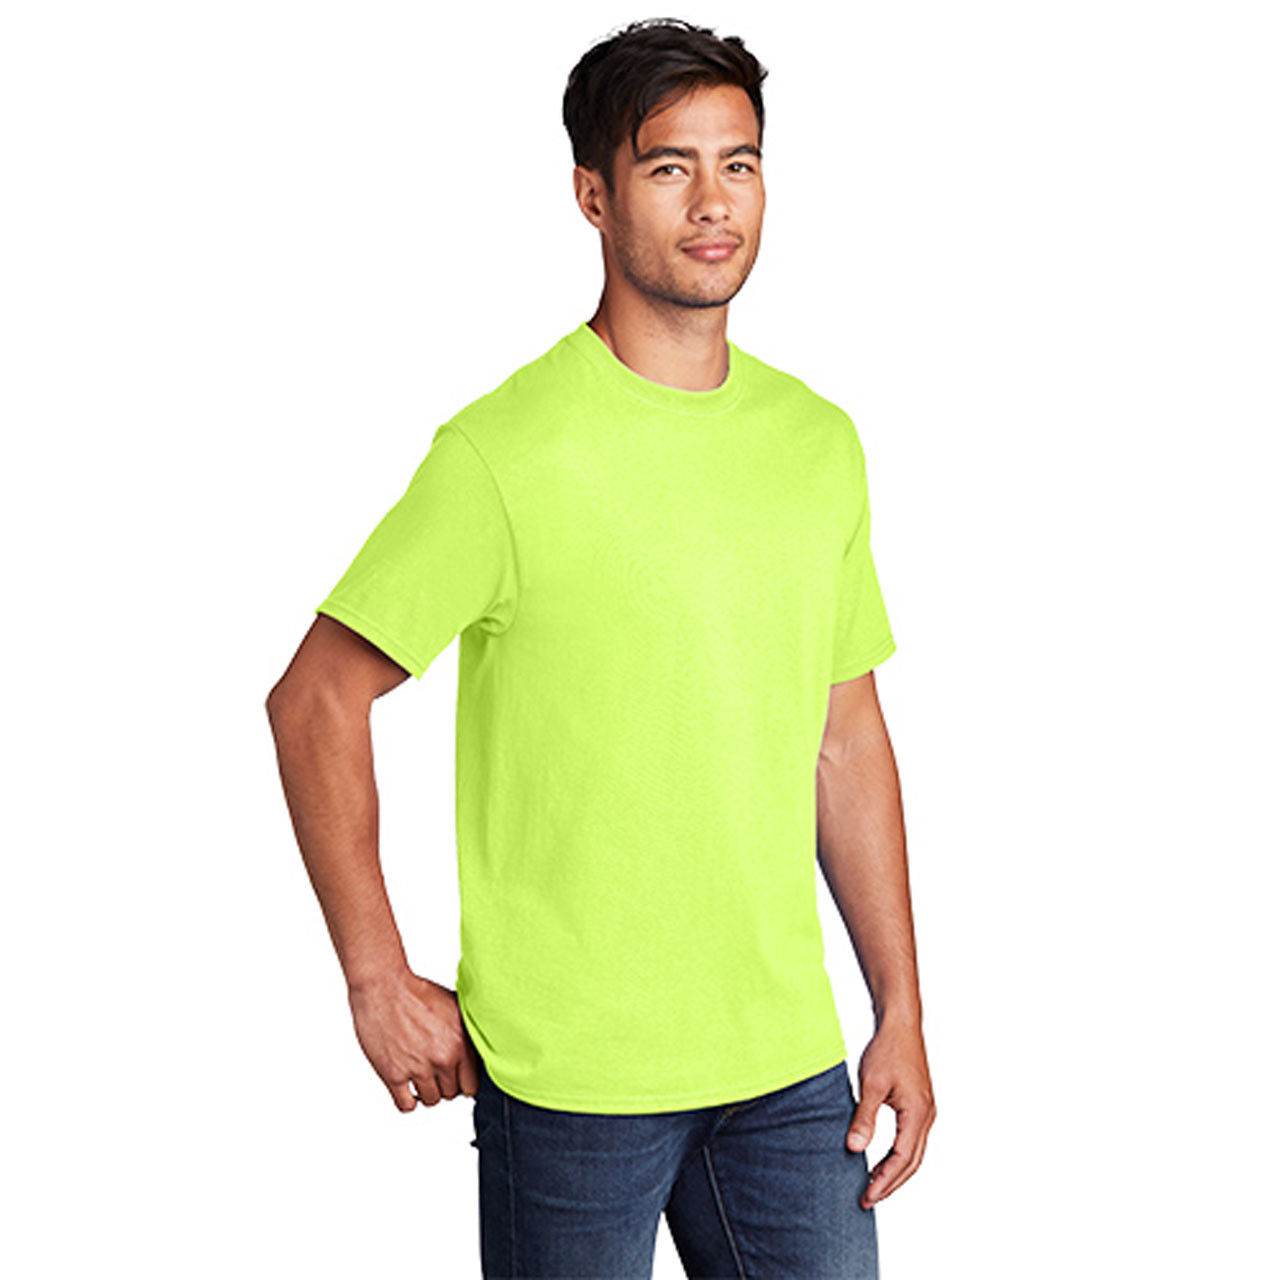 Would this neon color t shirt make a good gift?